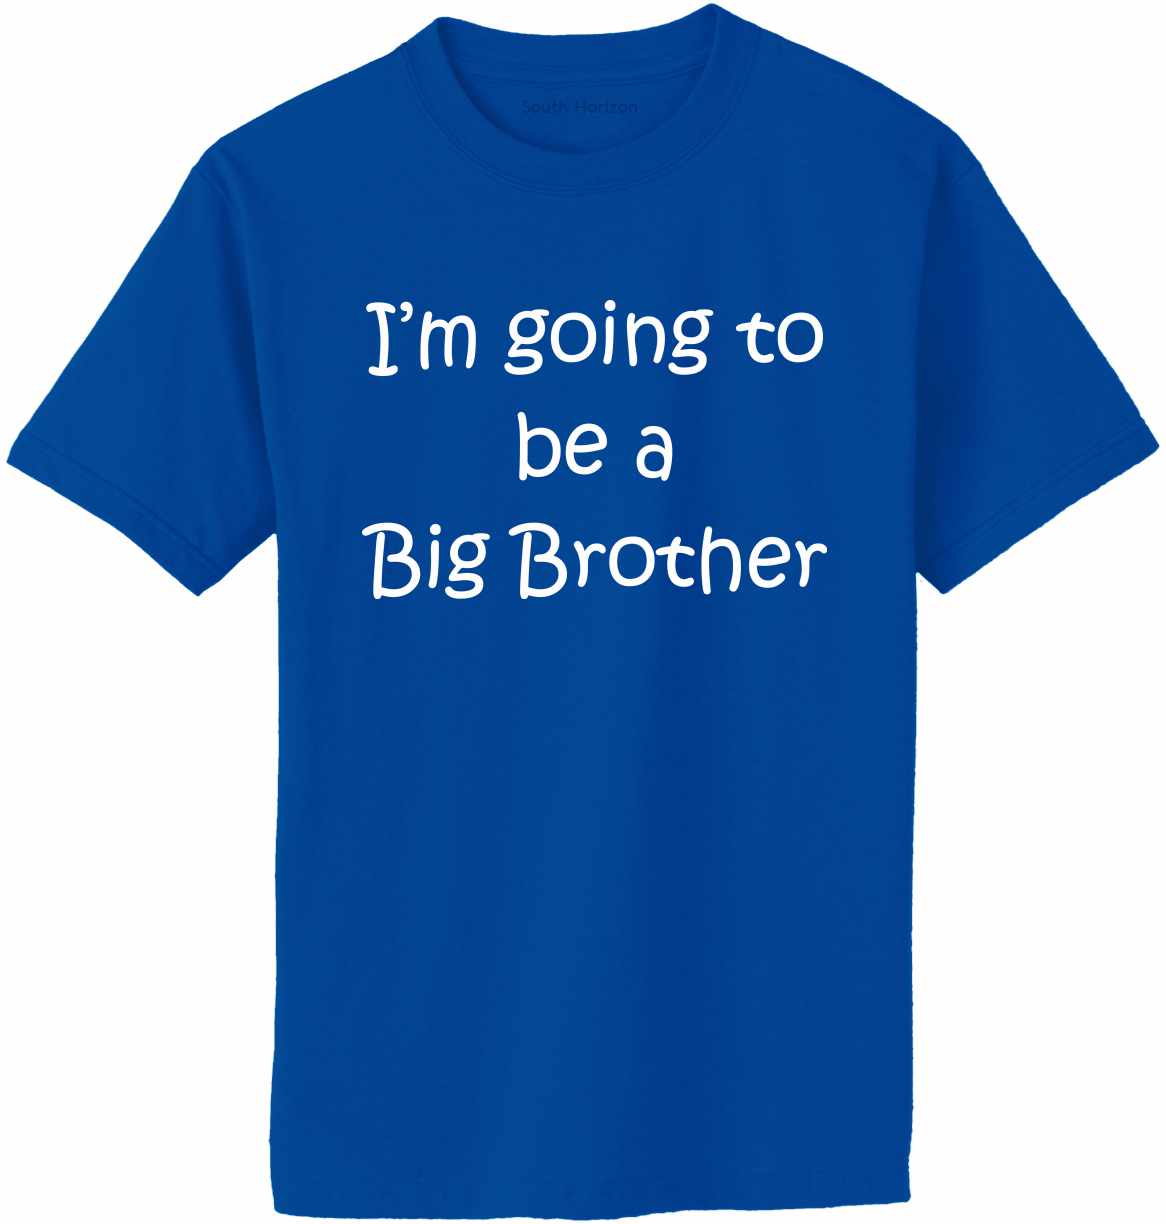 I'M GOING TO BE A BIG BROTHER Adult T-Shirt (#517-1)